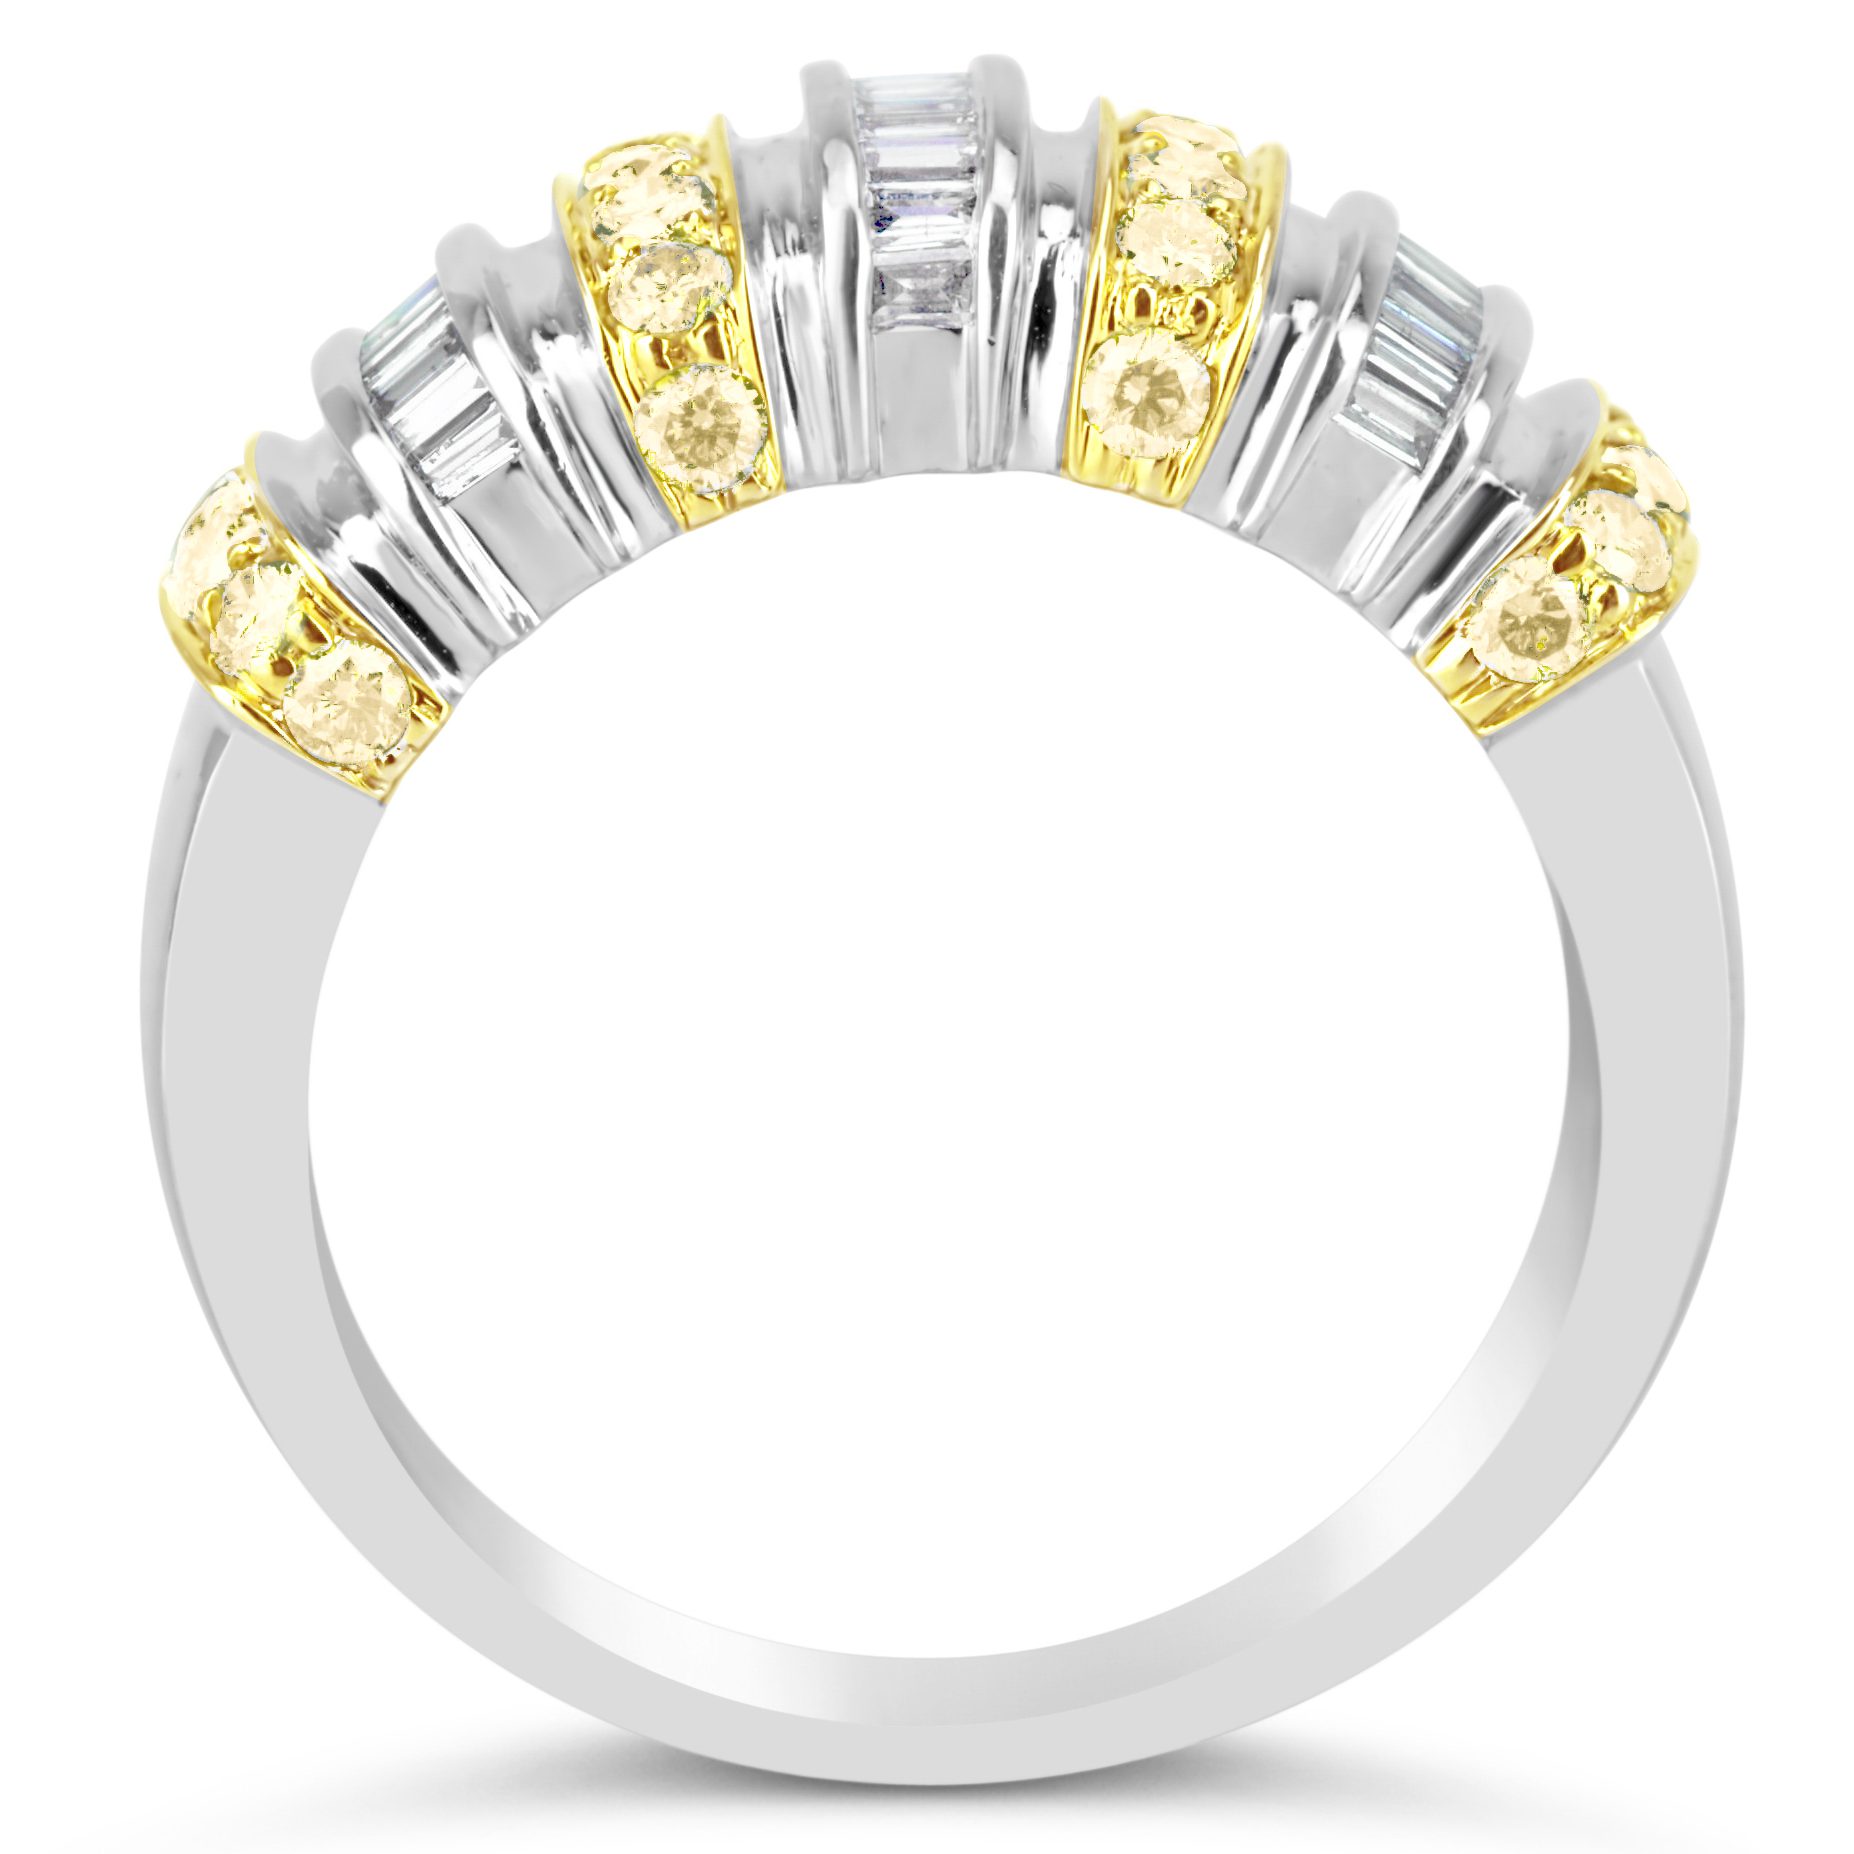 yellow diamond band with baguette diamonds in white and yellow gold